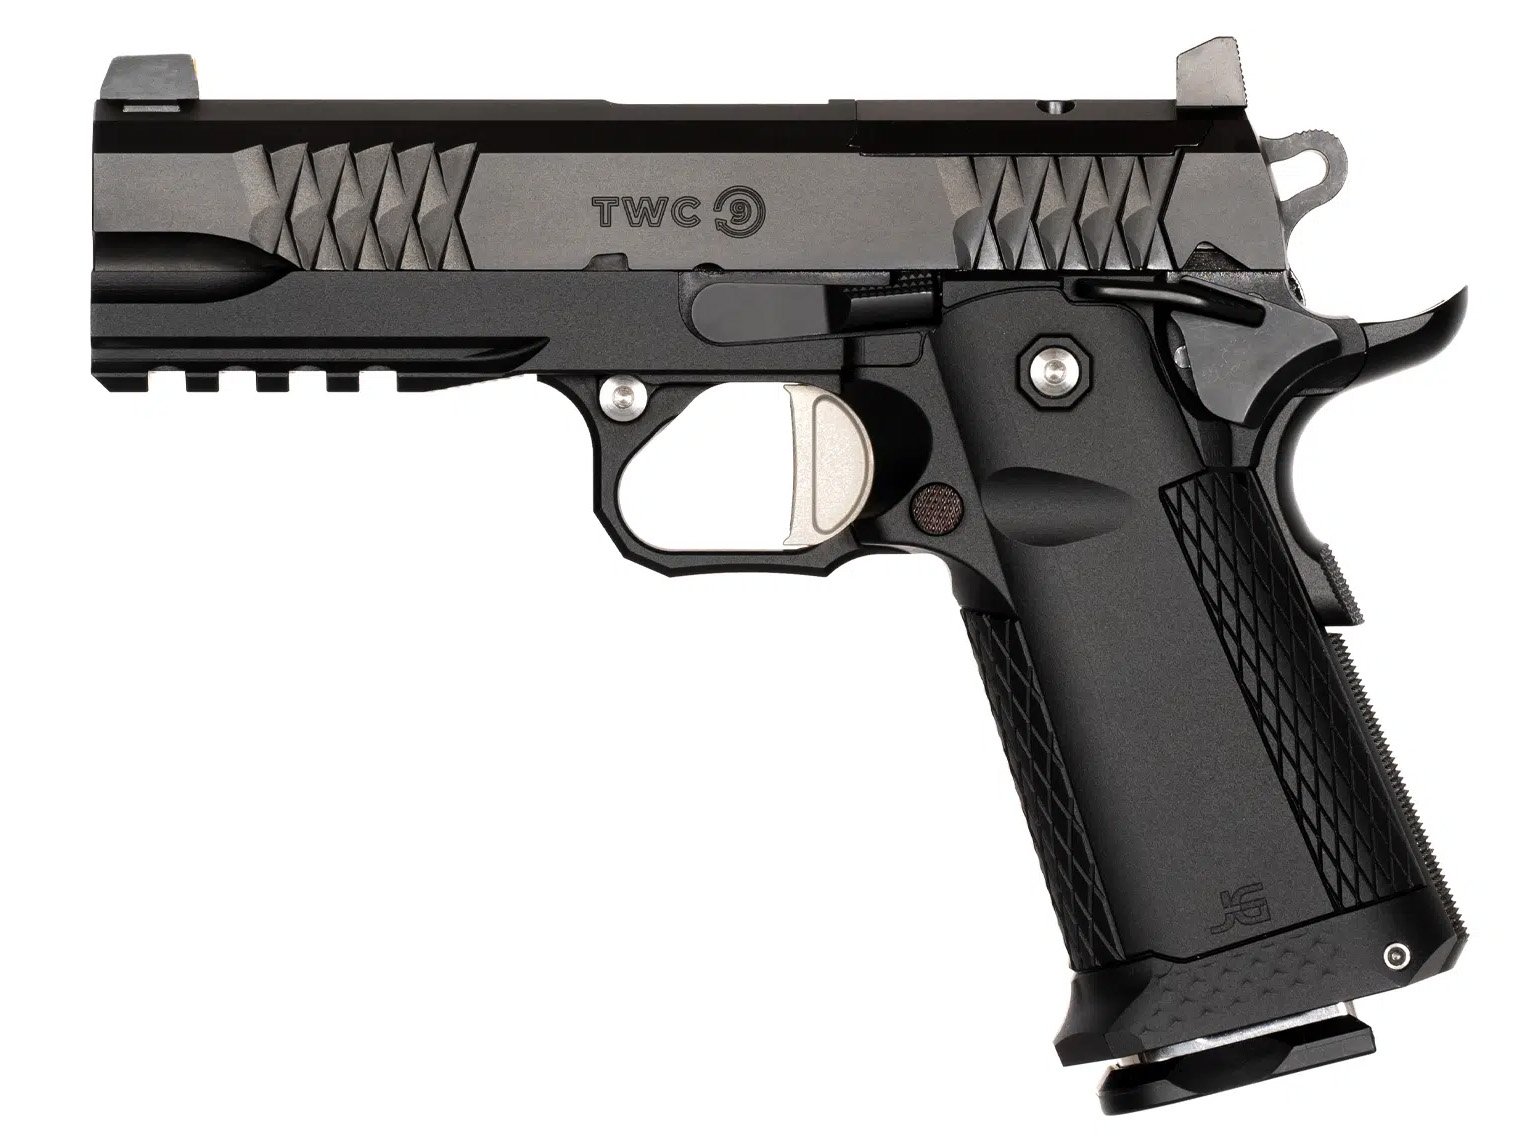 TWC 9 double stack 1911 from Jacob Grey Firearms